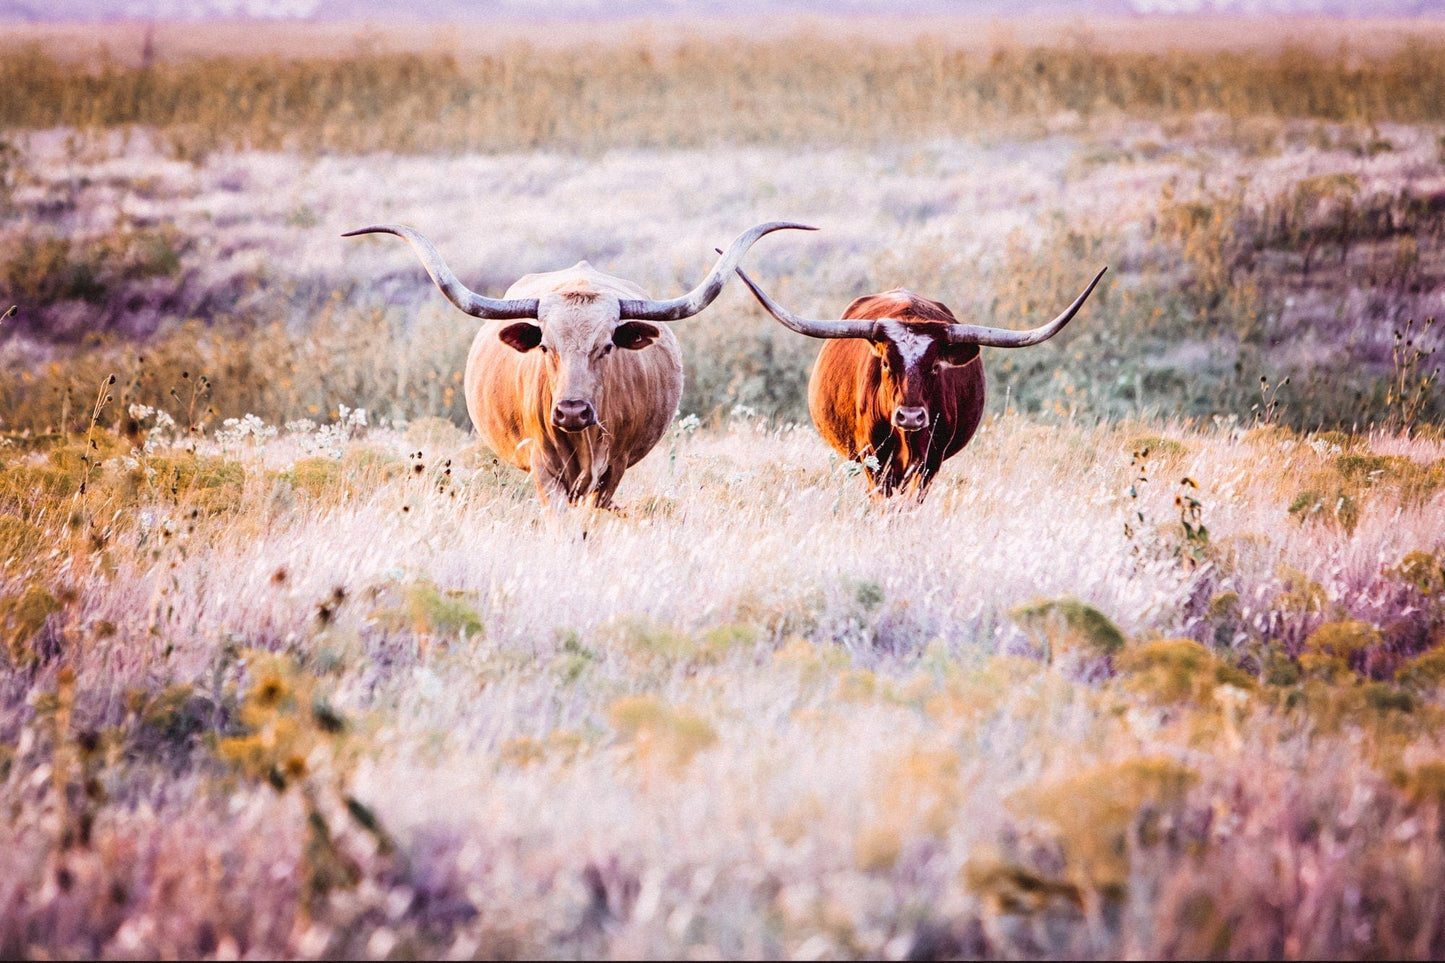 Texas Longhorn Cows in Colorful Pasture Grass Paper Photo Print / 12 x 18 Inches Wall Art Teri James Photography